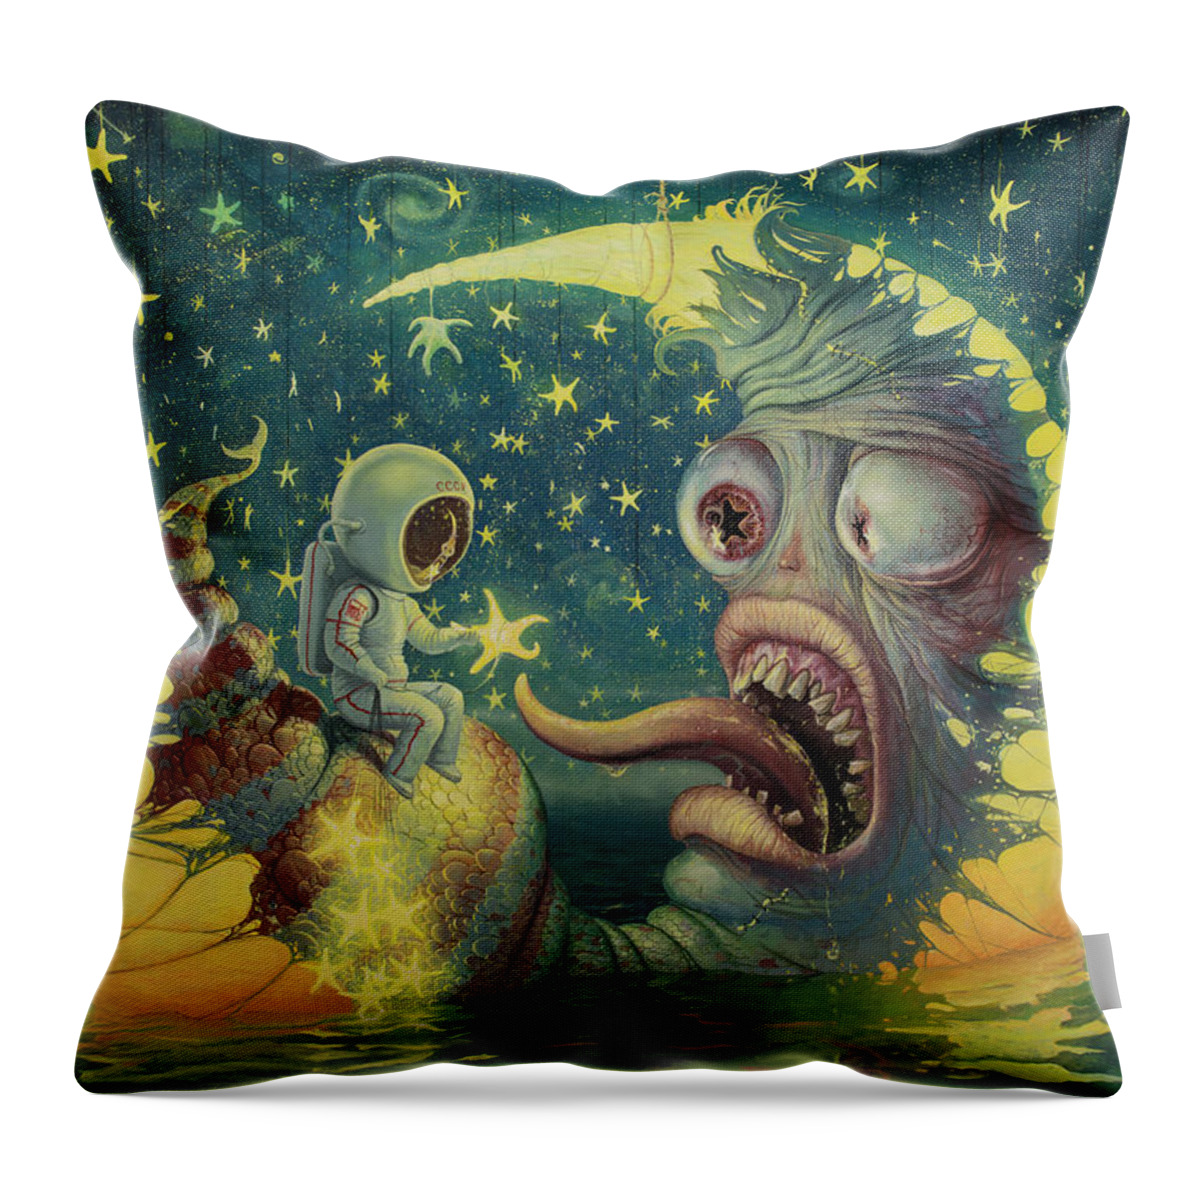 Astronaut Throw Pillow featuring the painting Feeding Your Inner Light by Adrian Borda